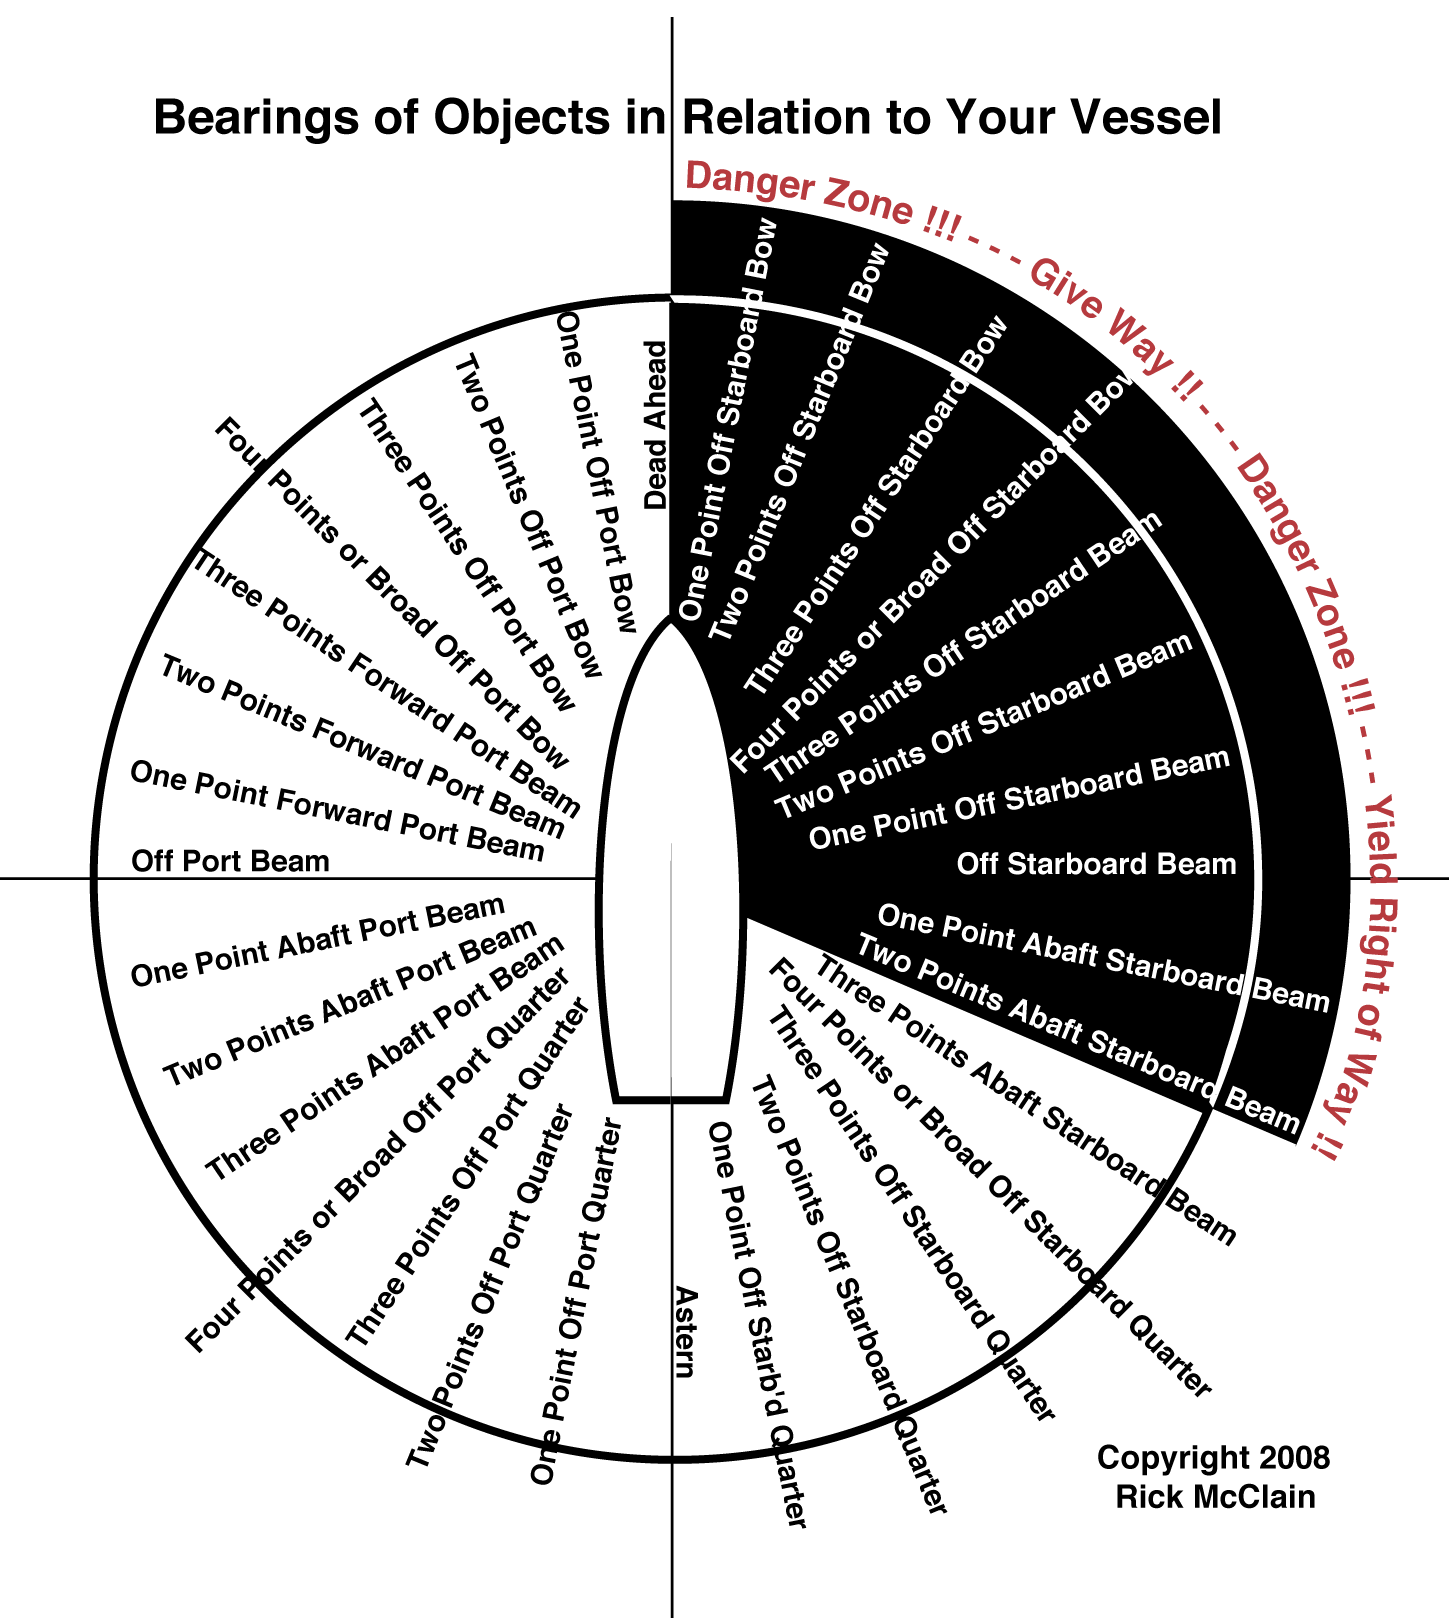 Bearings to bow of vessel